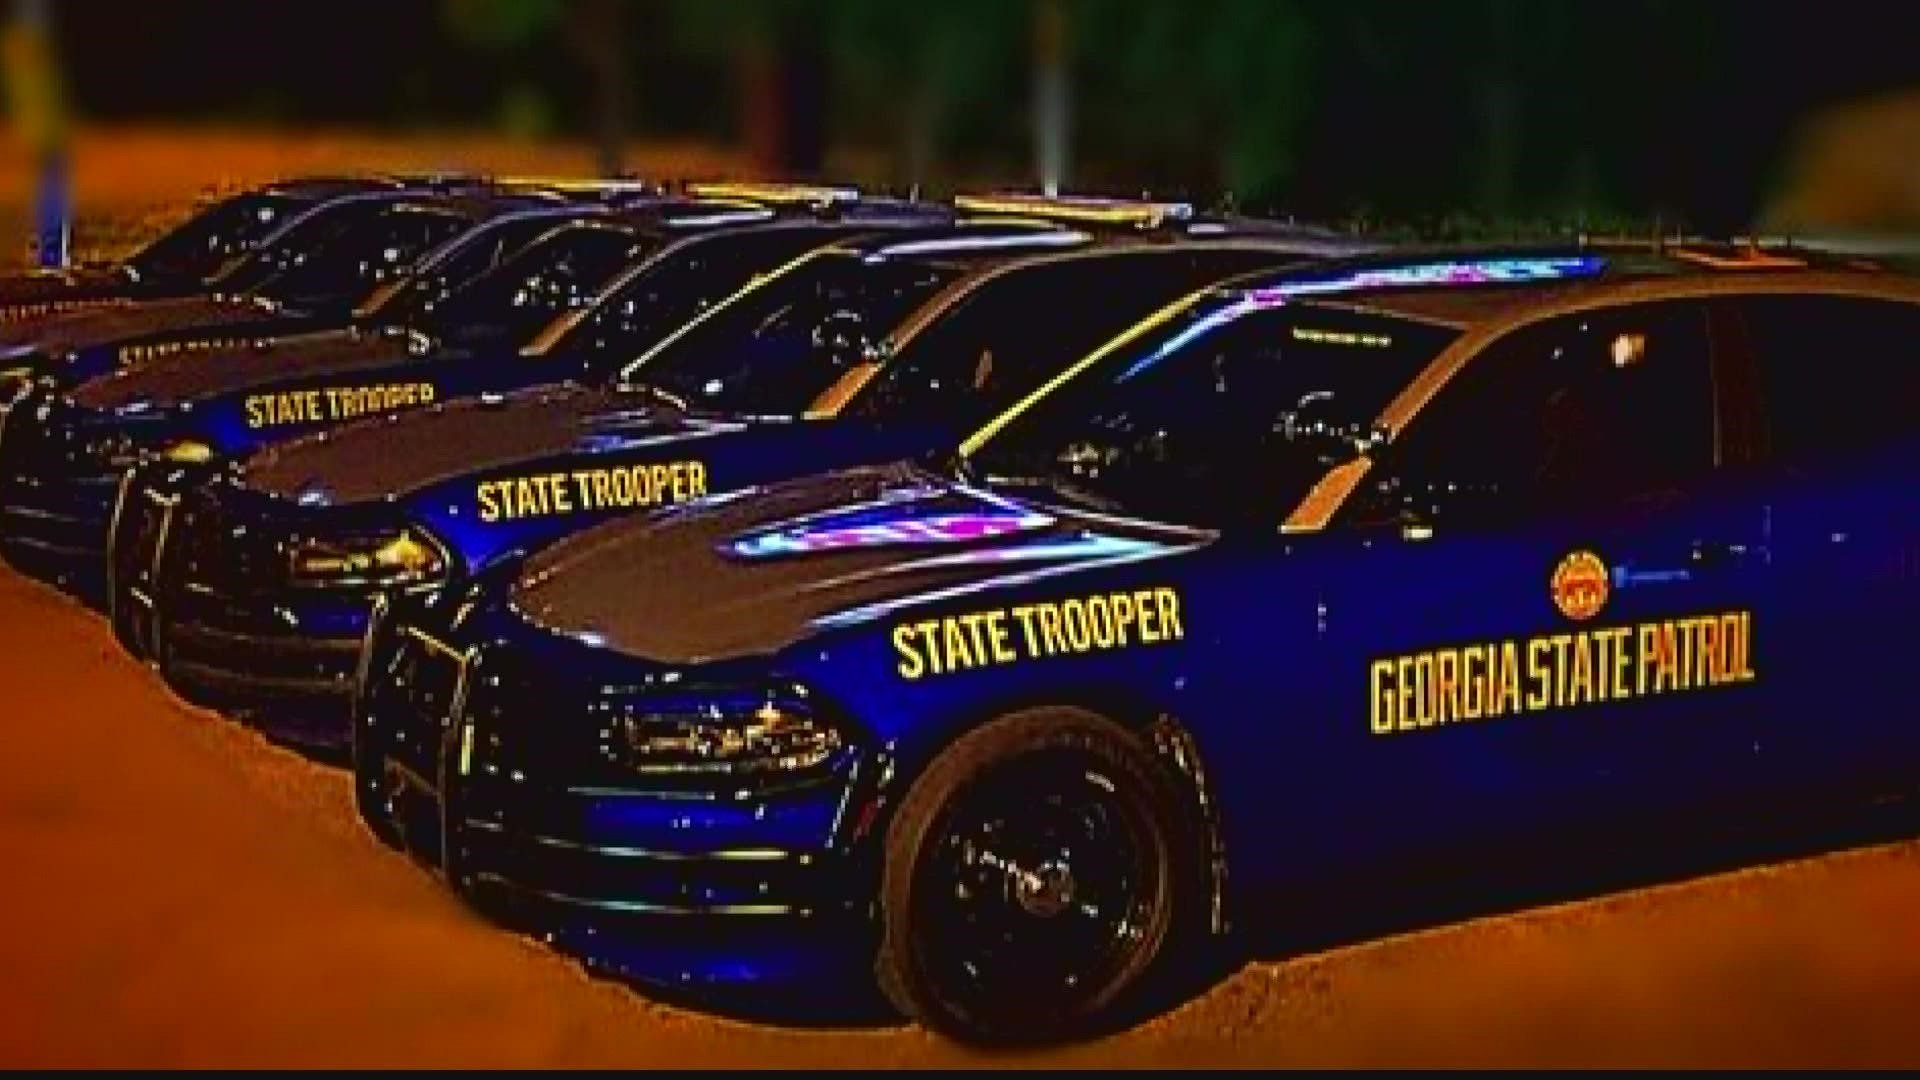 Instead of being required to have the rooftop light, this bill changes that requirement for only state patrol cars.